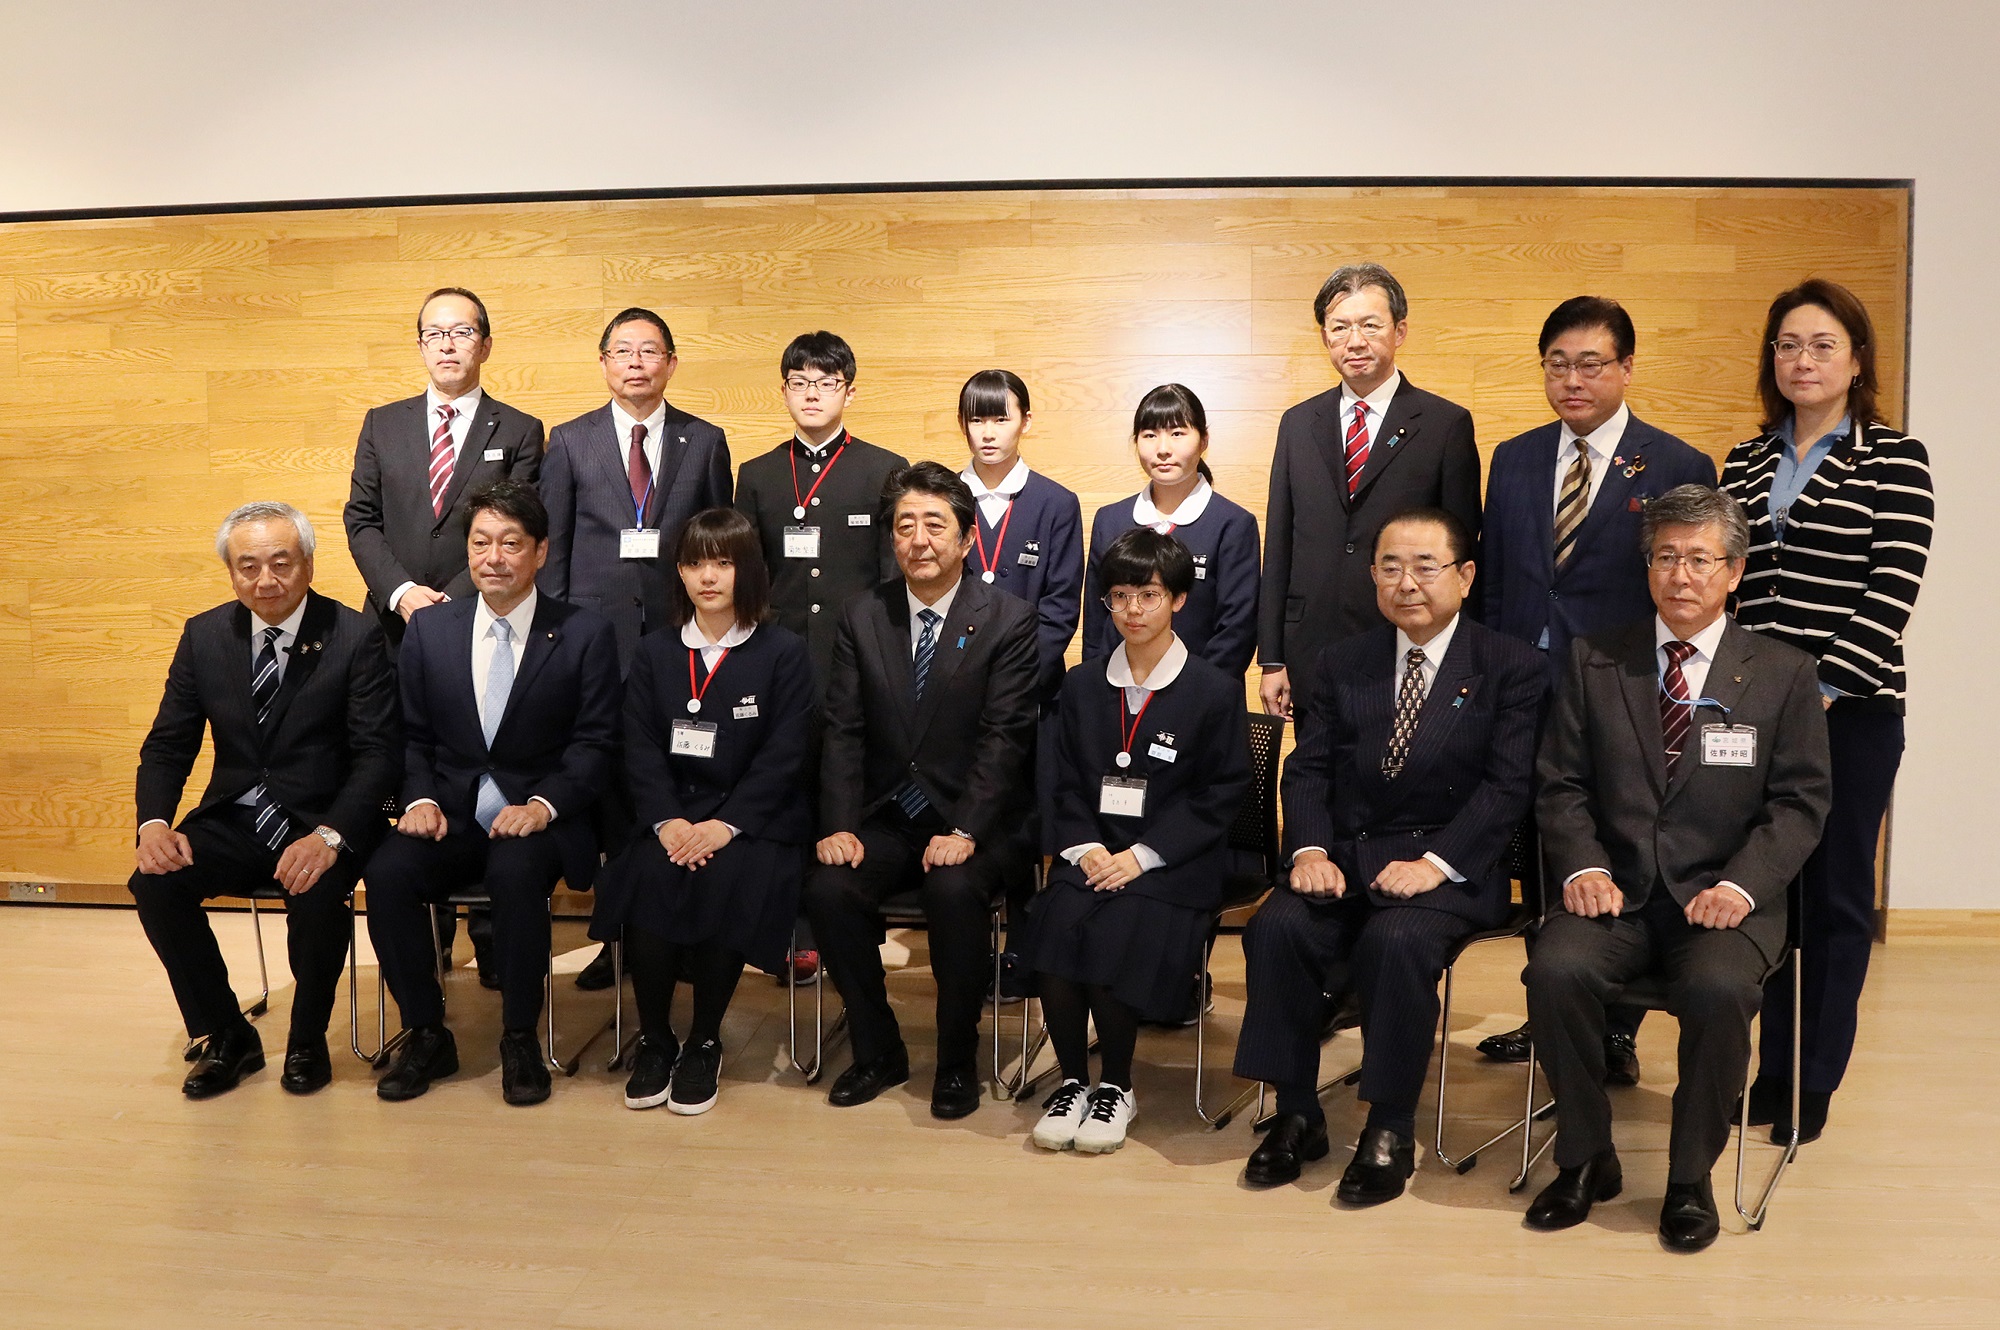 Photograph of the commemorative photograph session (1)